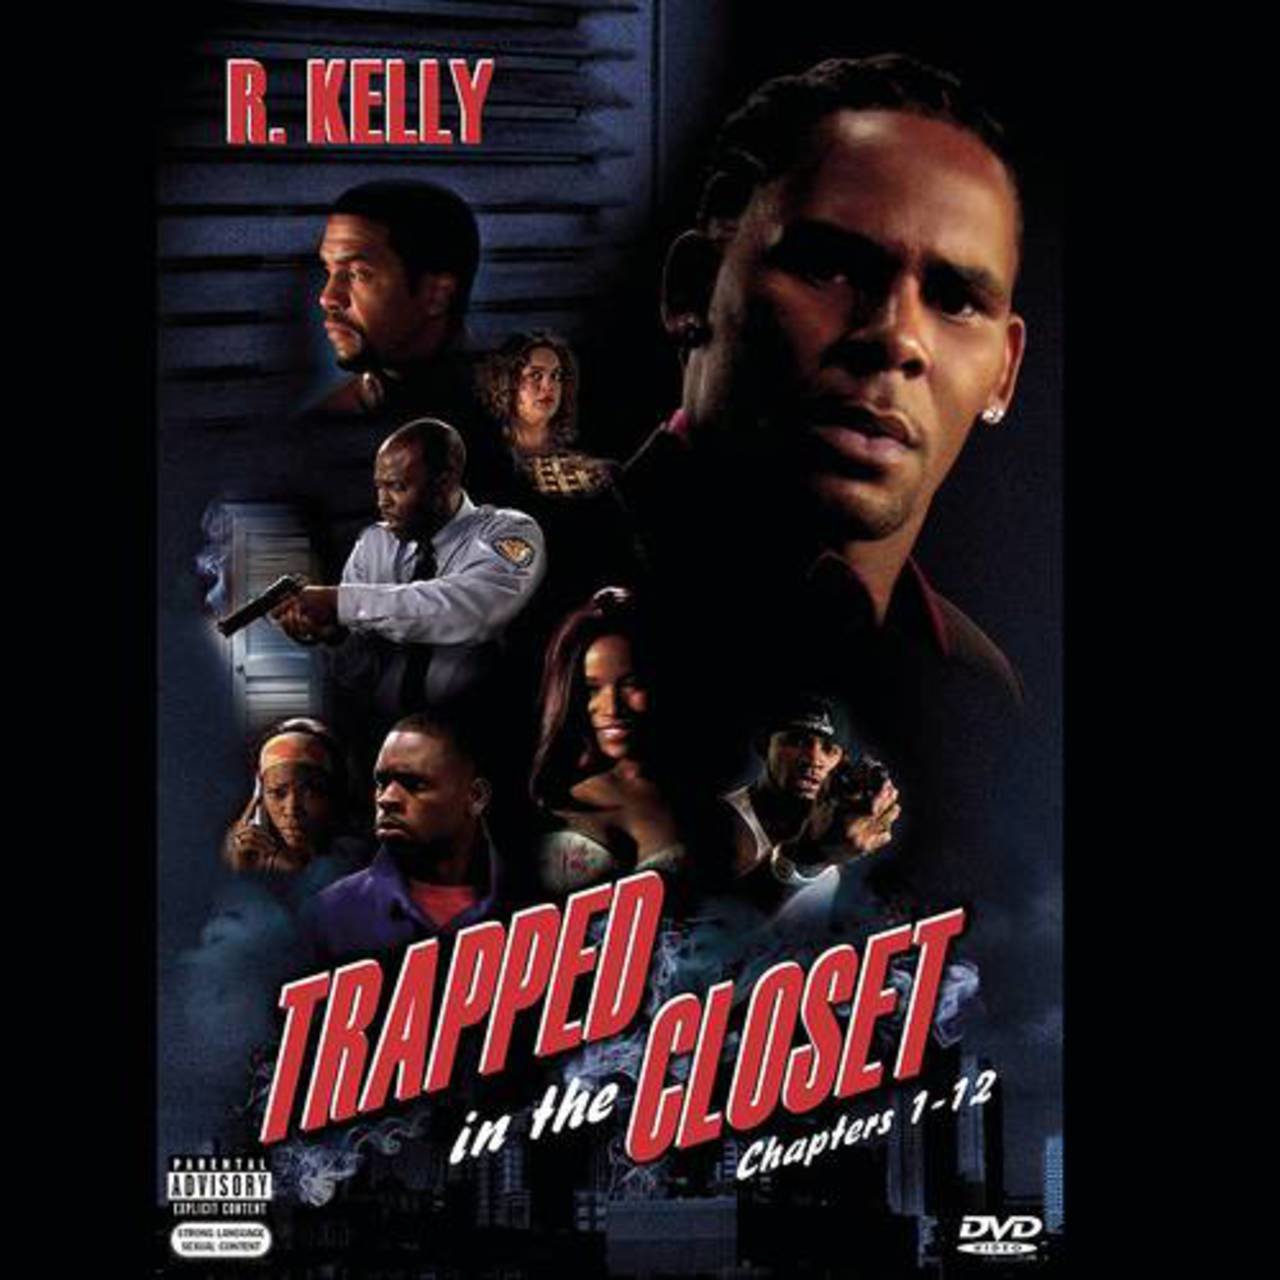 R. Kelly - Trapped In The Closet (Chapters 1-12) (Cover)